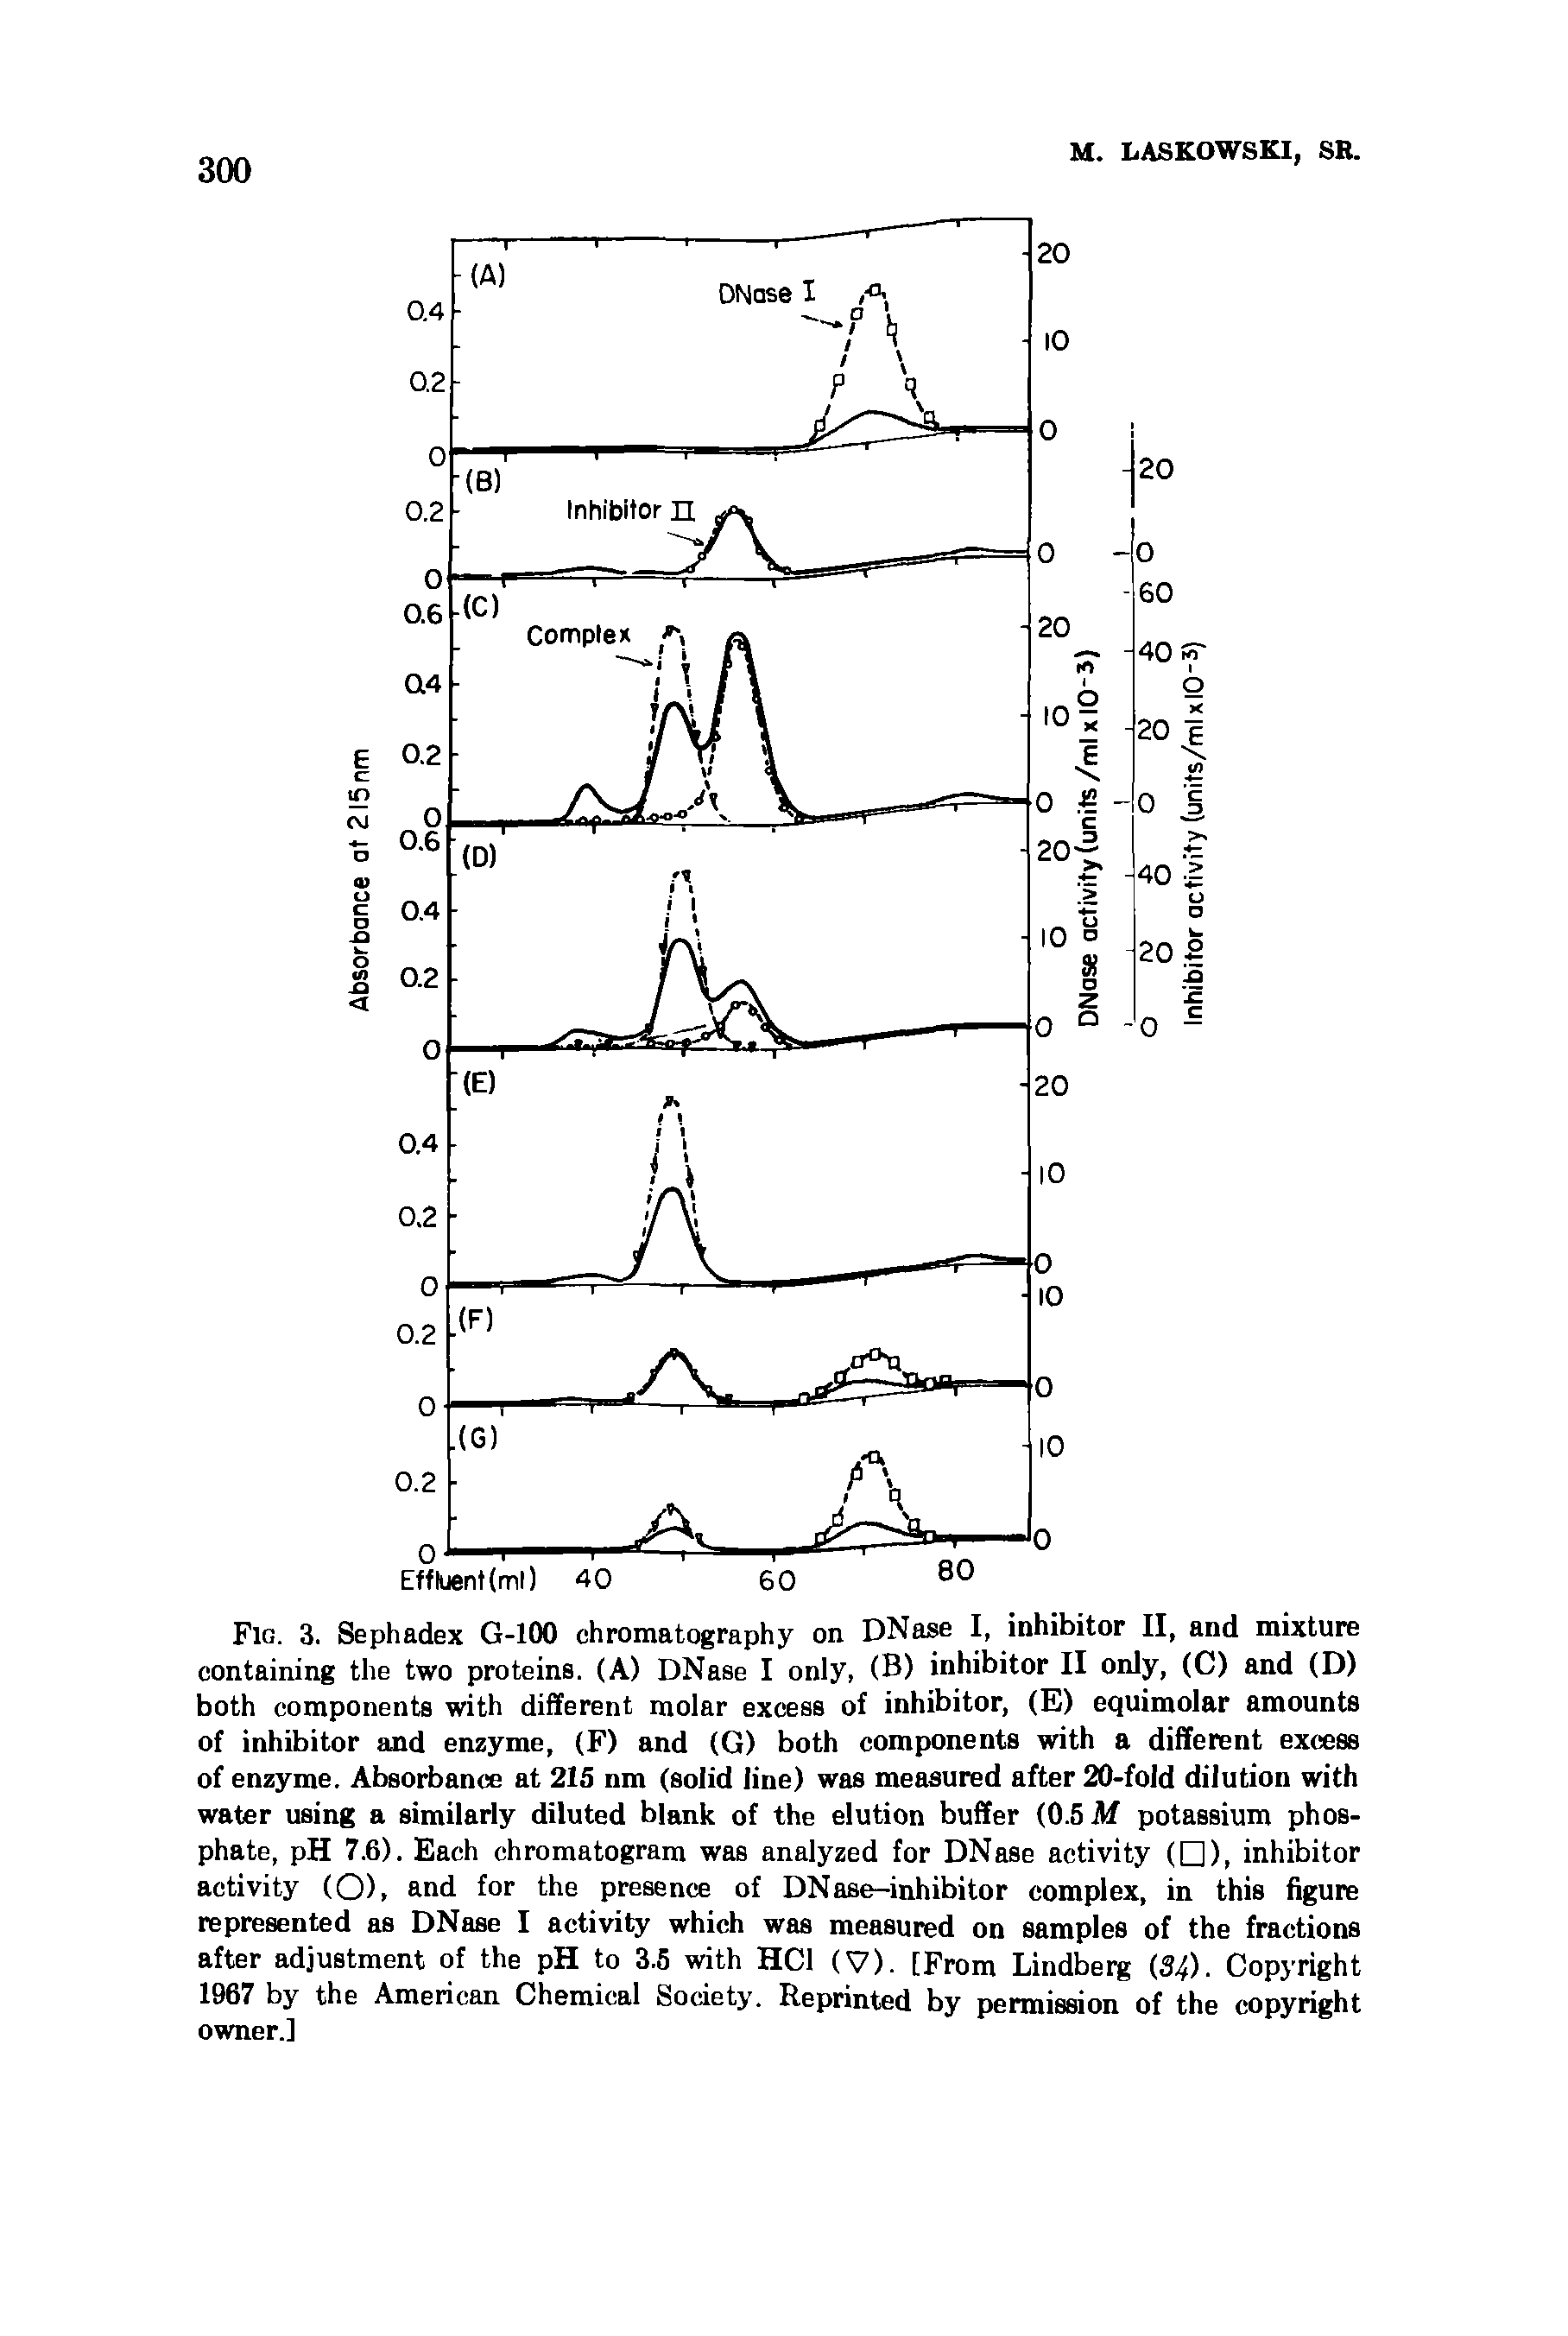 Fig. 3. Sephadex G-100 chromatography on DNase I, inhibitor II, and mixture containing the two proteins. (A) DNase I only, (B) inhibitor II only, (C) and (D) both components with different molar excess of inhibitor, (E) equimolar amounts of inhibitor and enzyme, (F) and (G) both components with a different excess of enzyme. Absorbance at 215 nm (solid line) was measured after 20-fold dilution with water using a similarly diluted blank of the elution buffer (0.5 M potassium phosphate, pH 7.6). Each chromatogram was analyzed for DNase activity ( ), inhibitor activity (O), and for the presence of DNase-inhibitor complex, in this figure represented as DNase I activity which was measured on samples of the fractions after adjustment of the pH to 3.5 with HC1 (V). [From Lindberg (34). Copyright 1967 by the American Chemical Society. Reprinted by permission of the copyright owner.]...